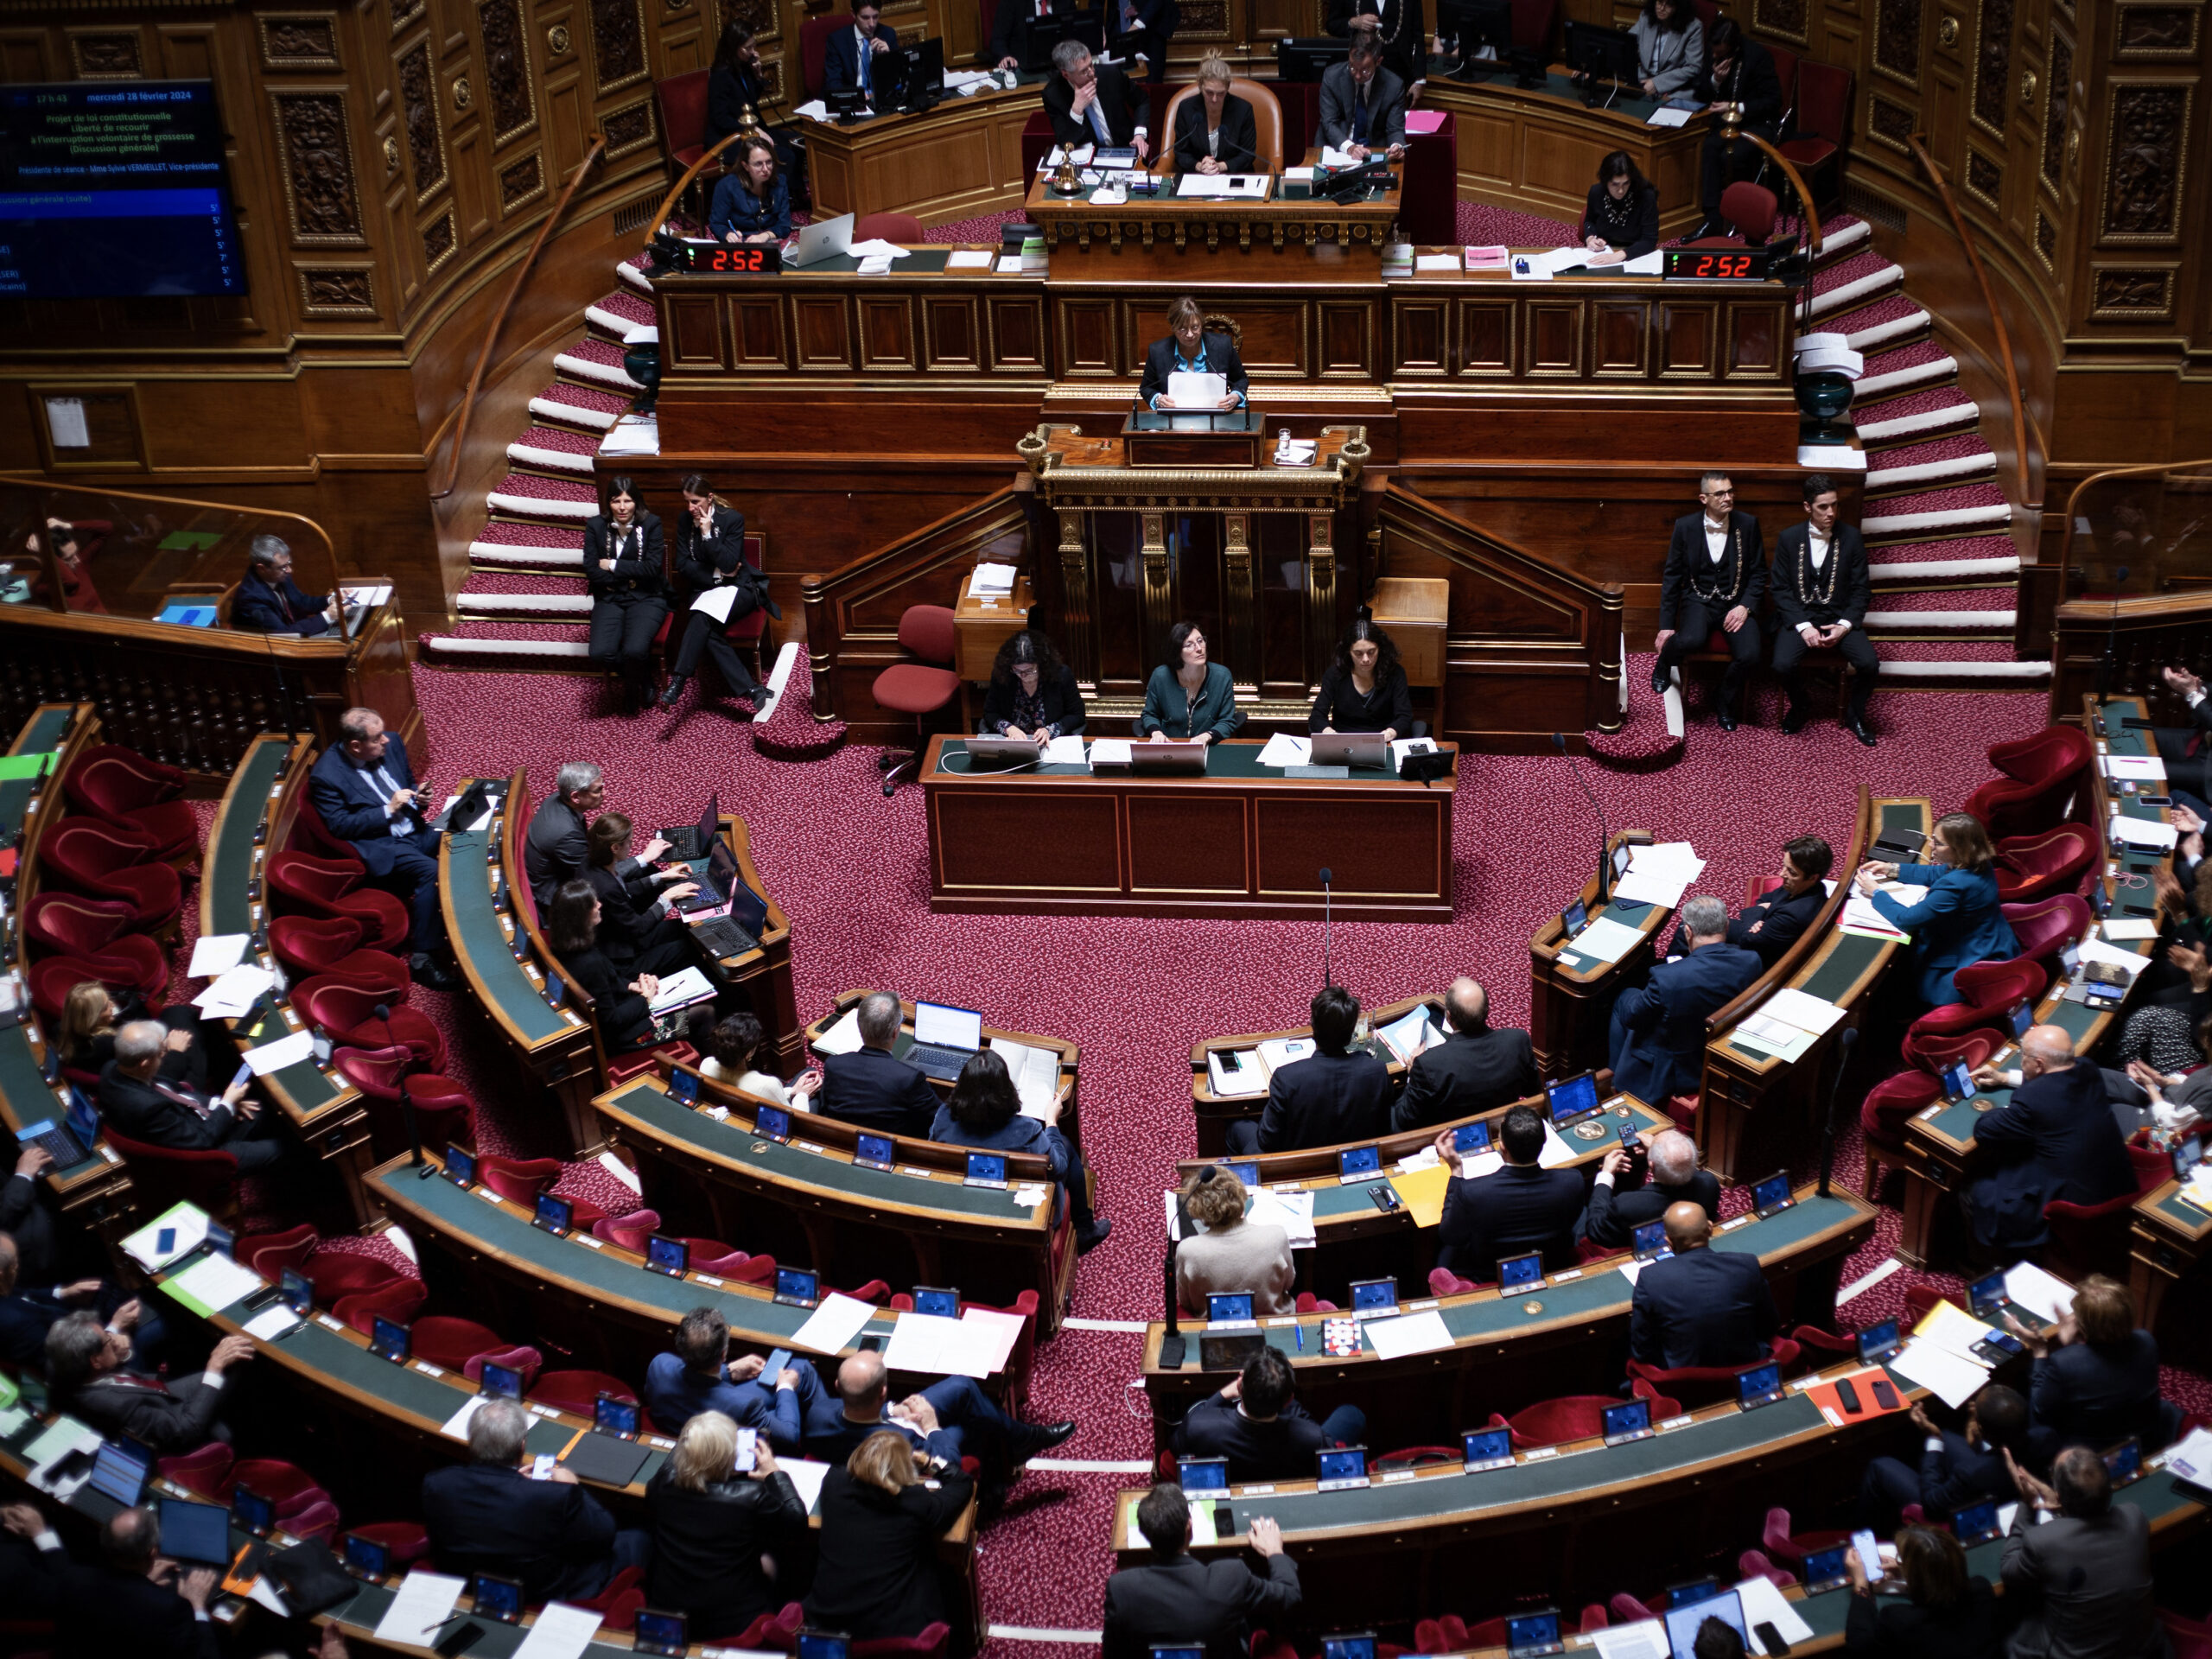 View of the hemicycle of the French Senate in Paris during the debate on enshrining abortion in the constitution, on Feb. 28.